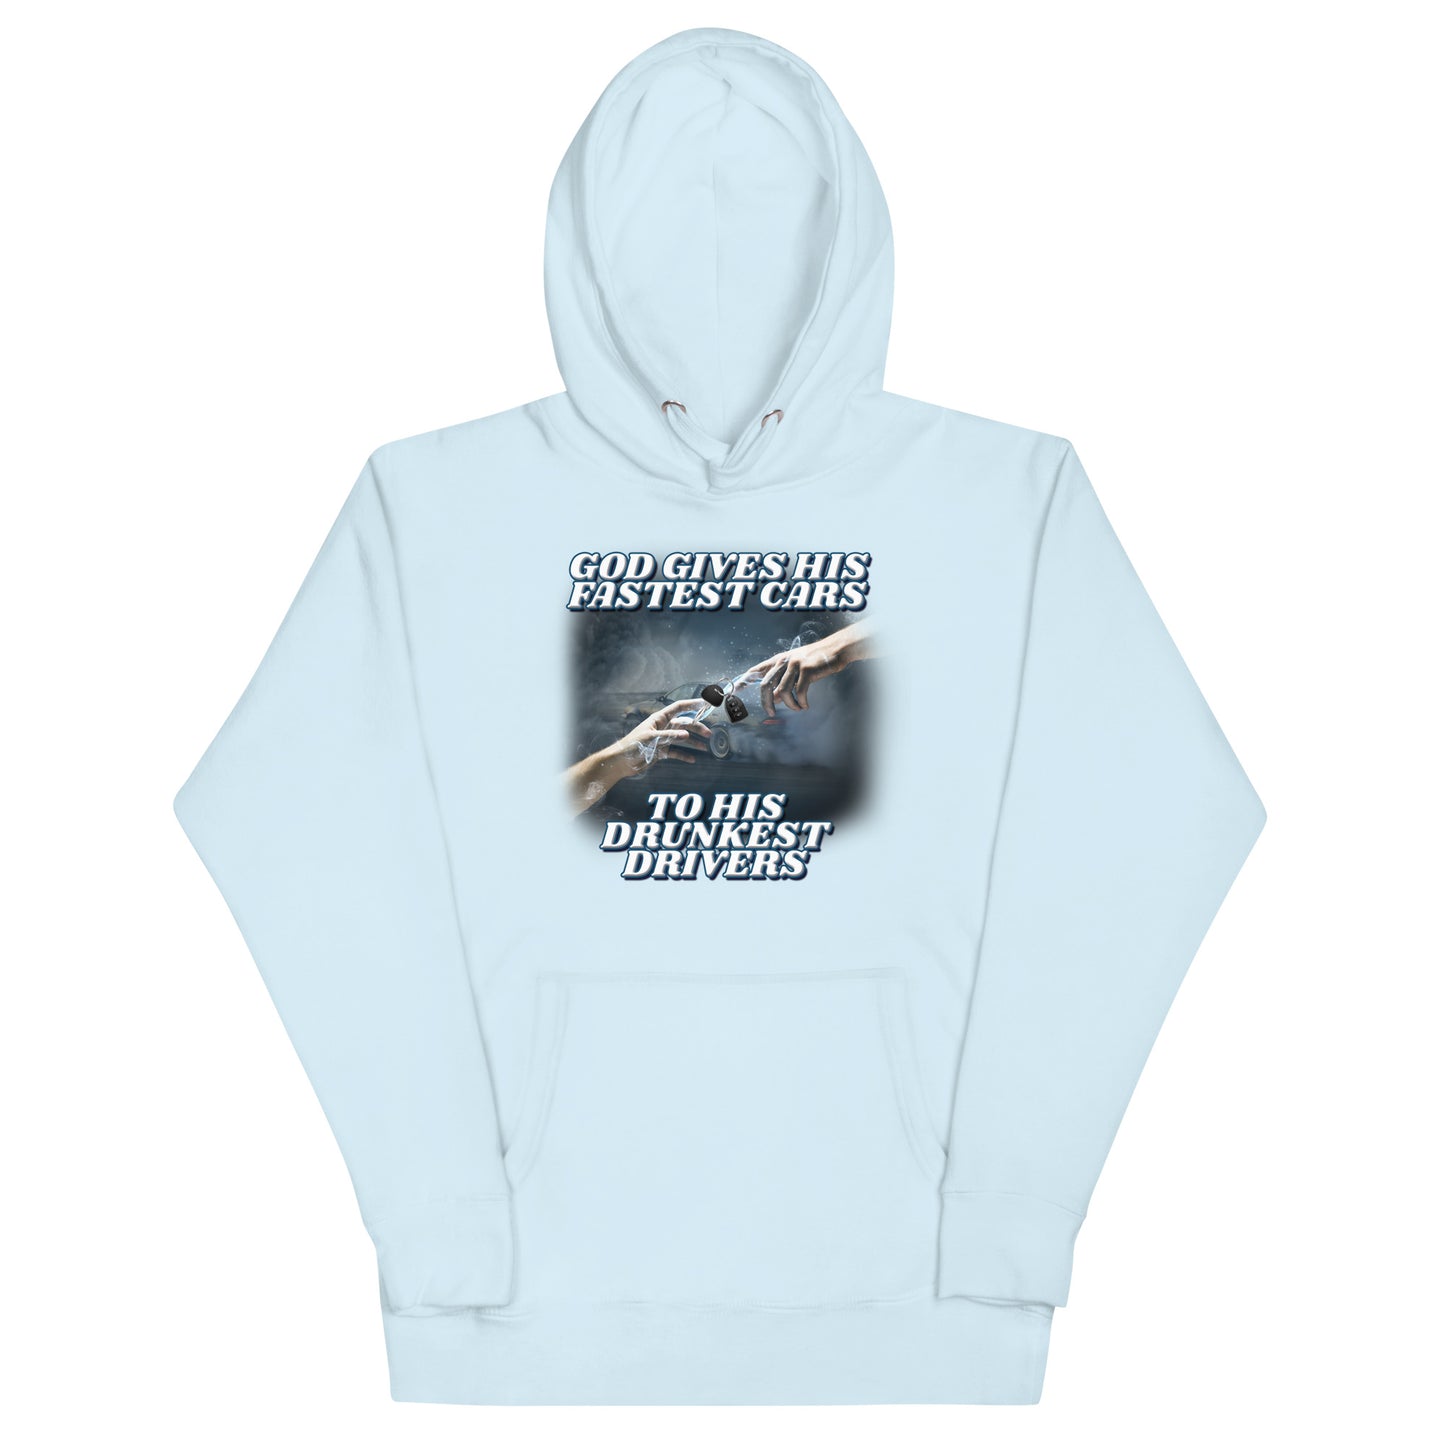 God Gives His Fastest Cars to His Drunkest Drivers Unisex Hoodie